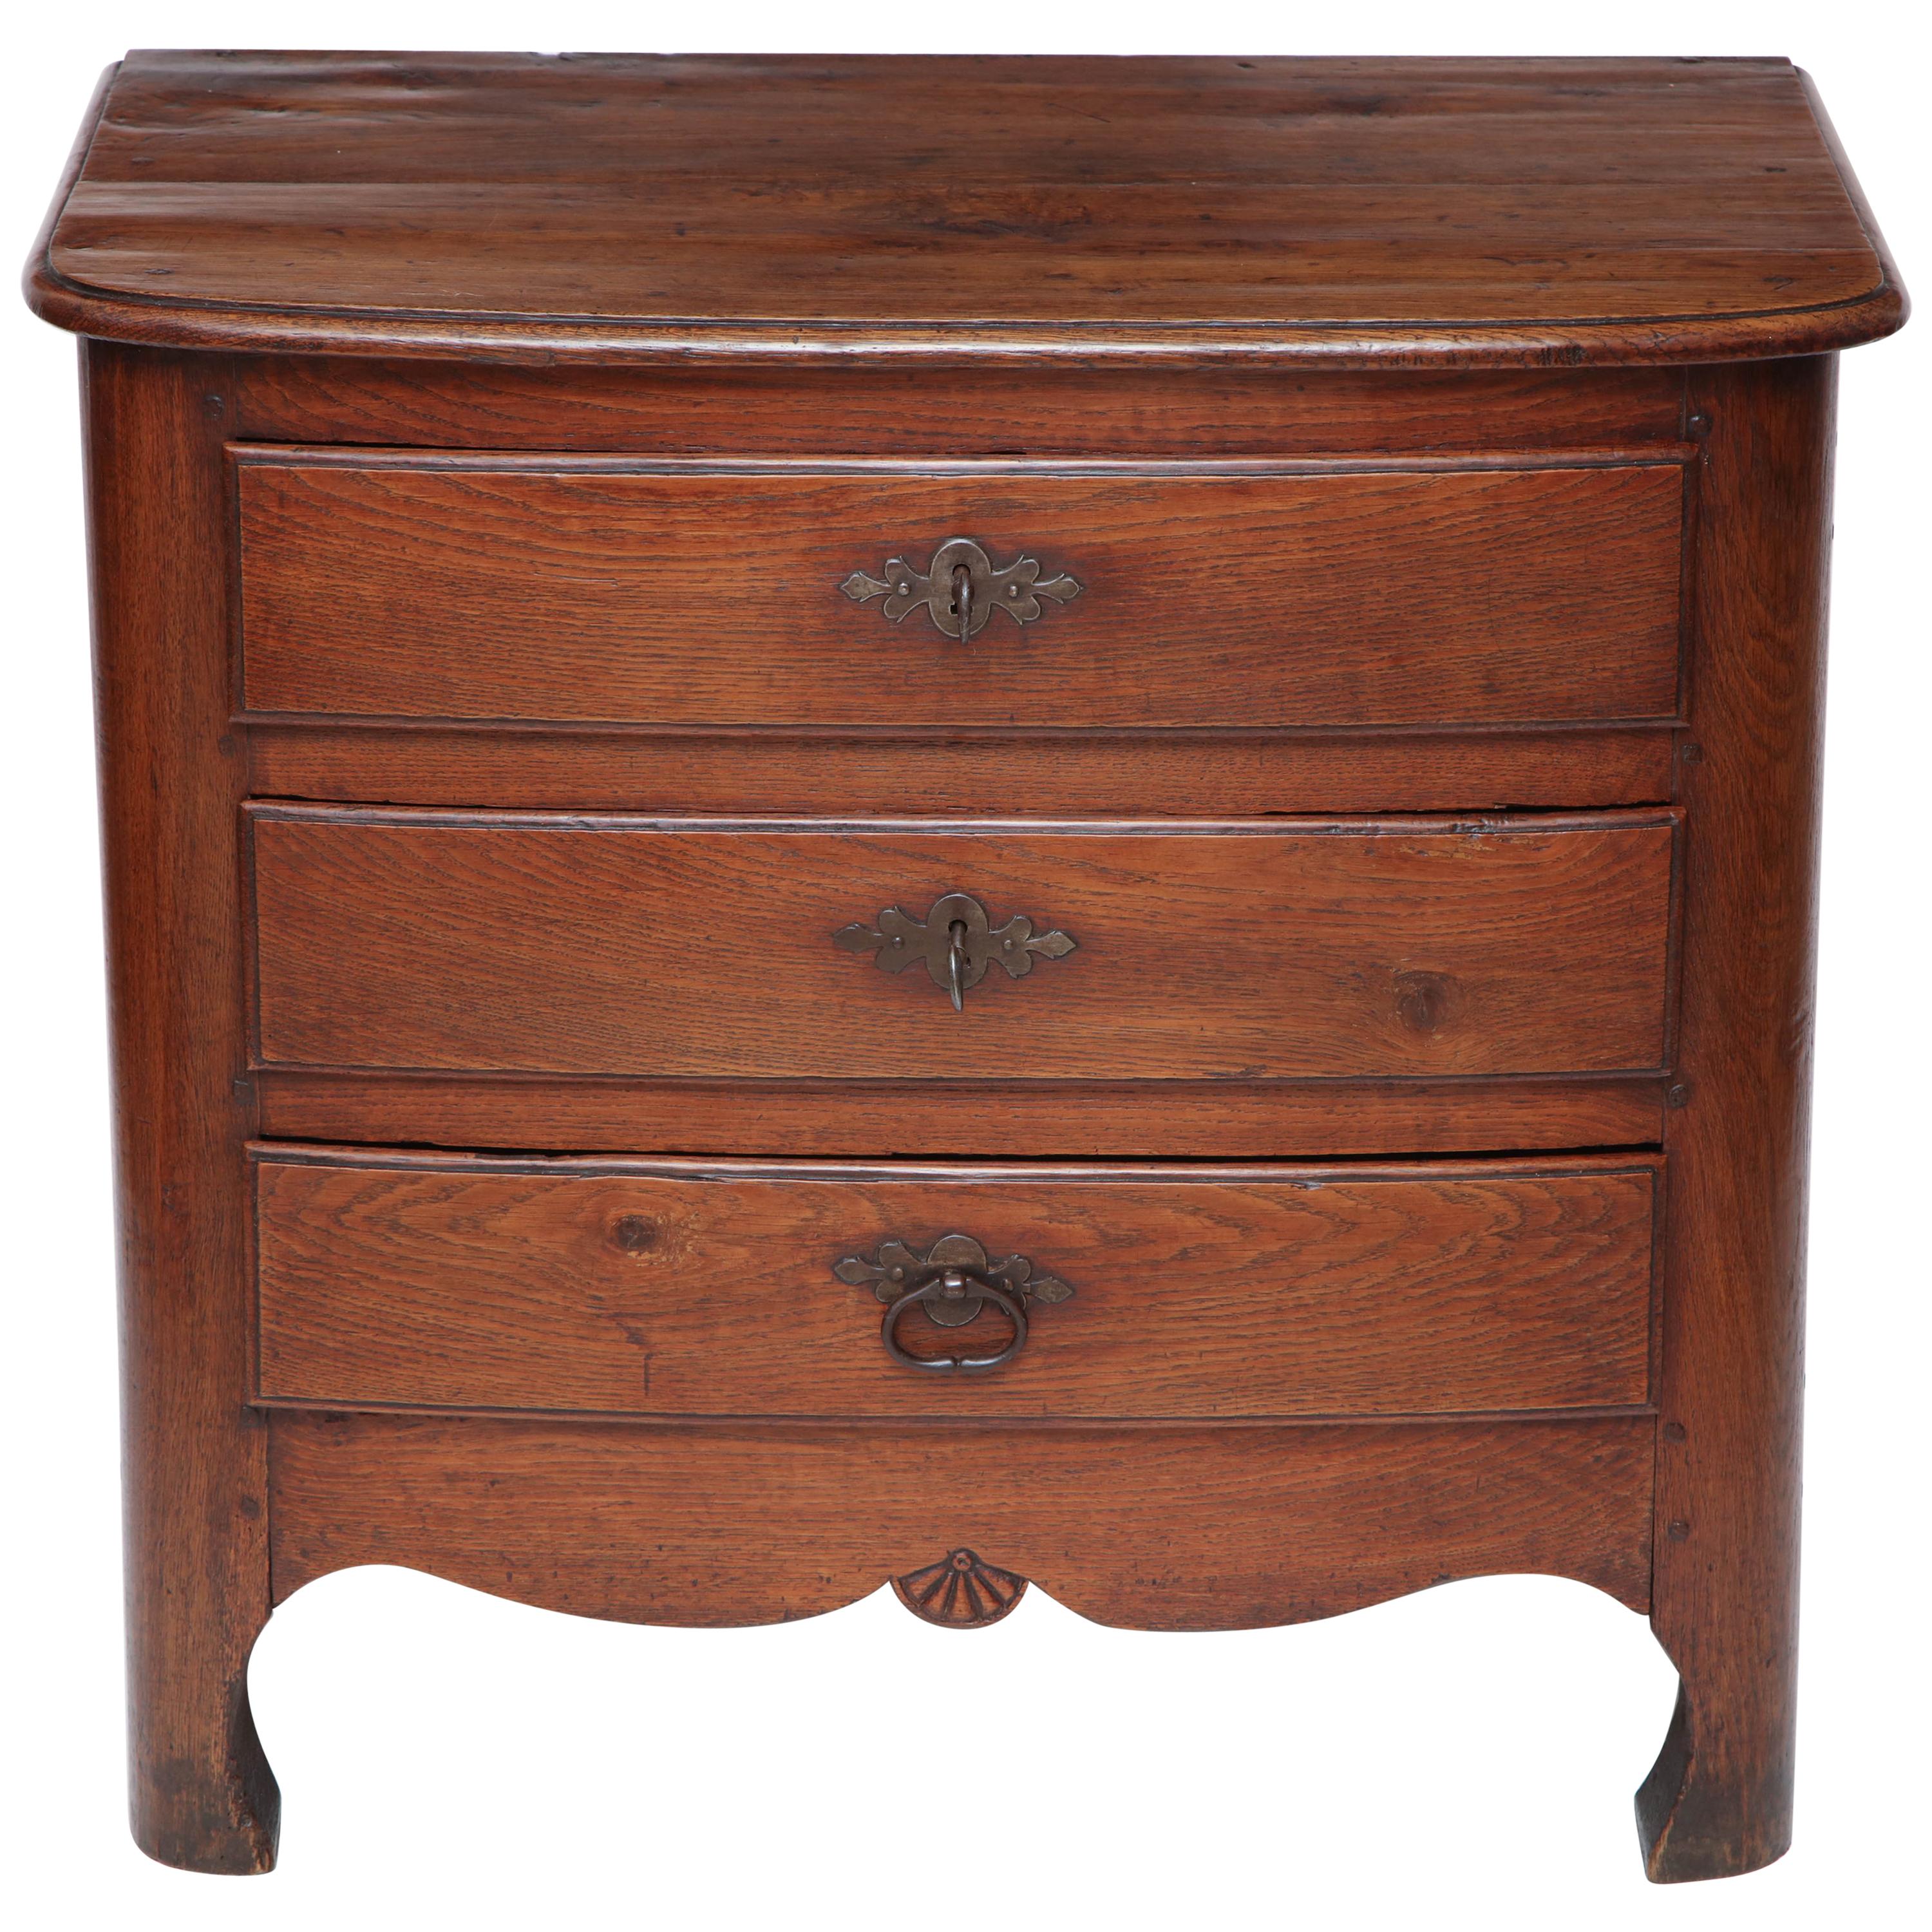 Small French Oak Commode with Three Drawers, circa 18th Century